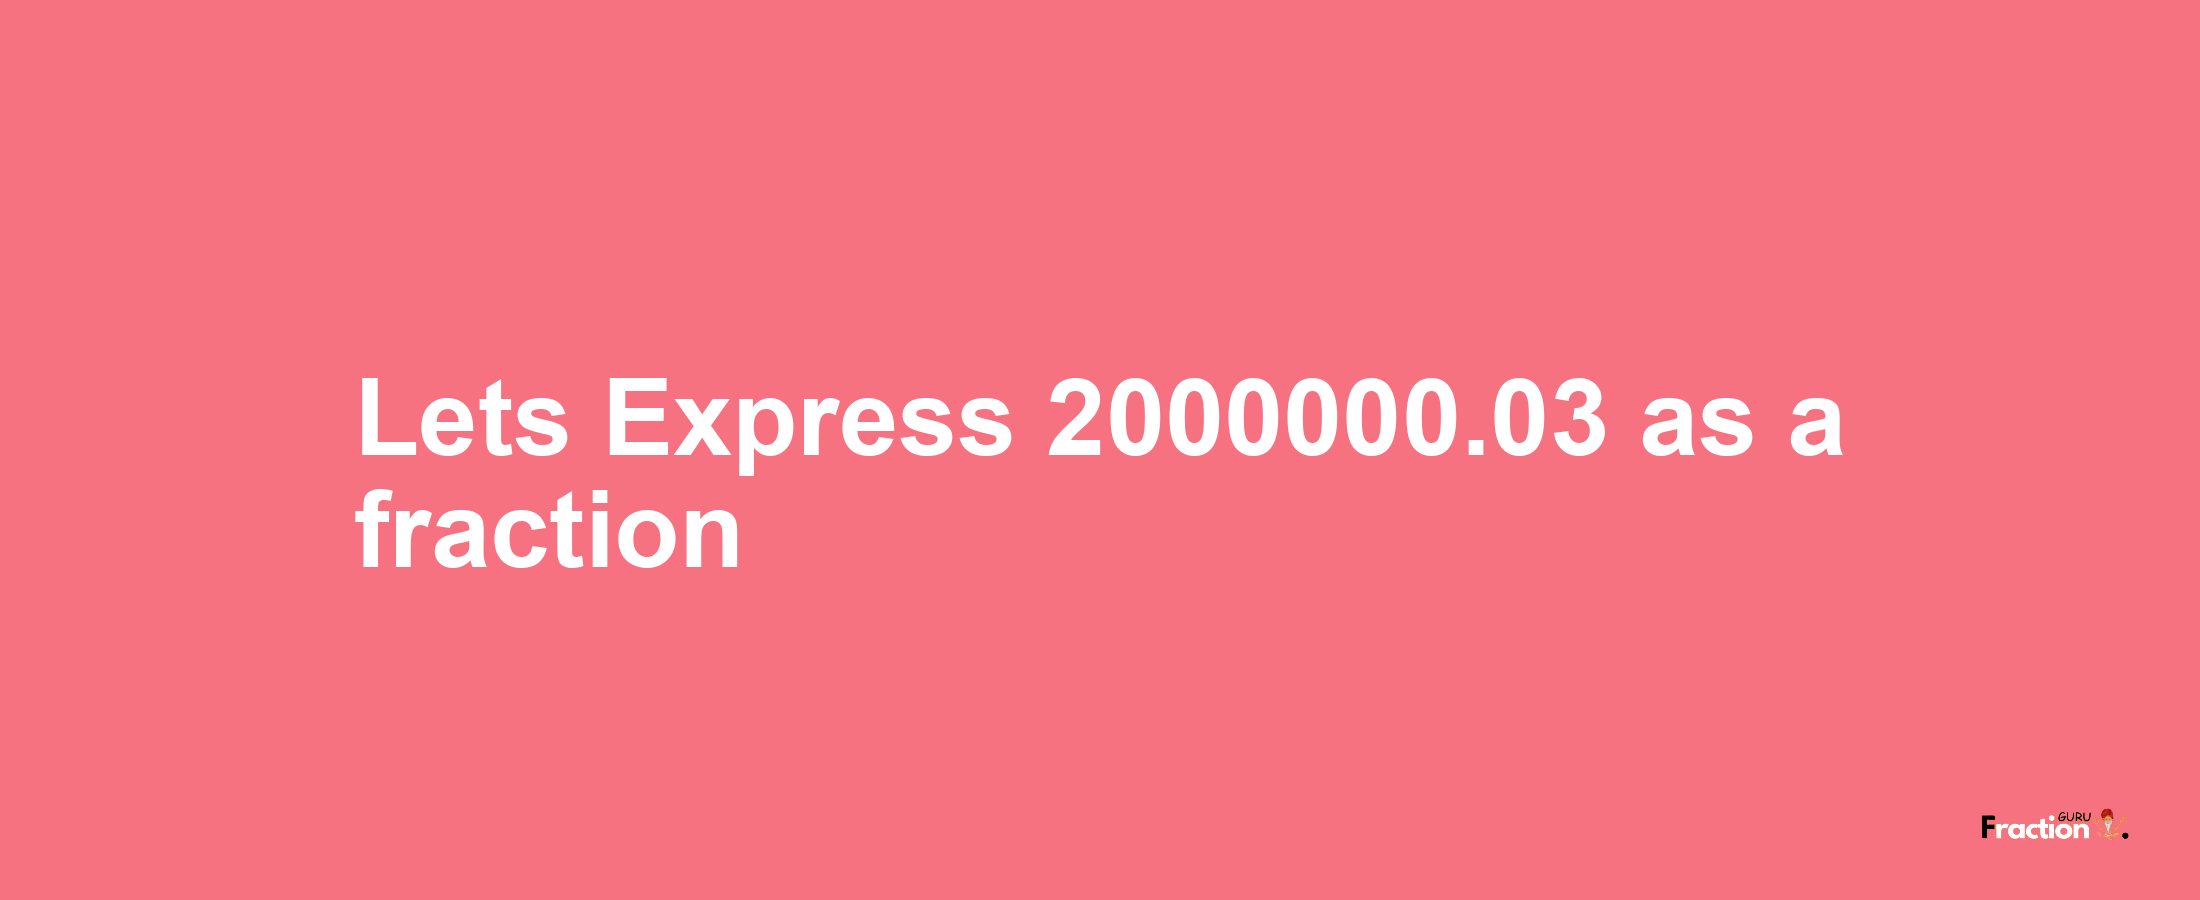 Lets Express 2000000.03 as afraction